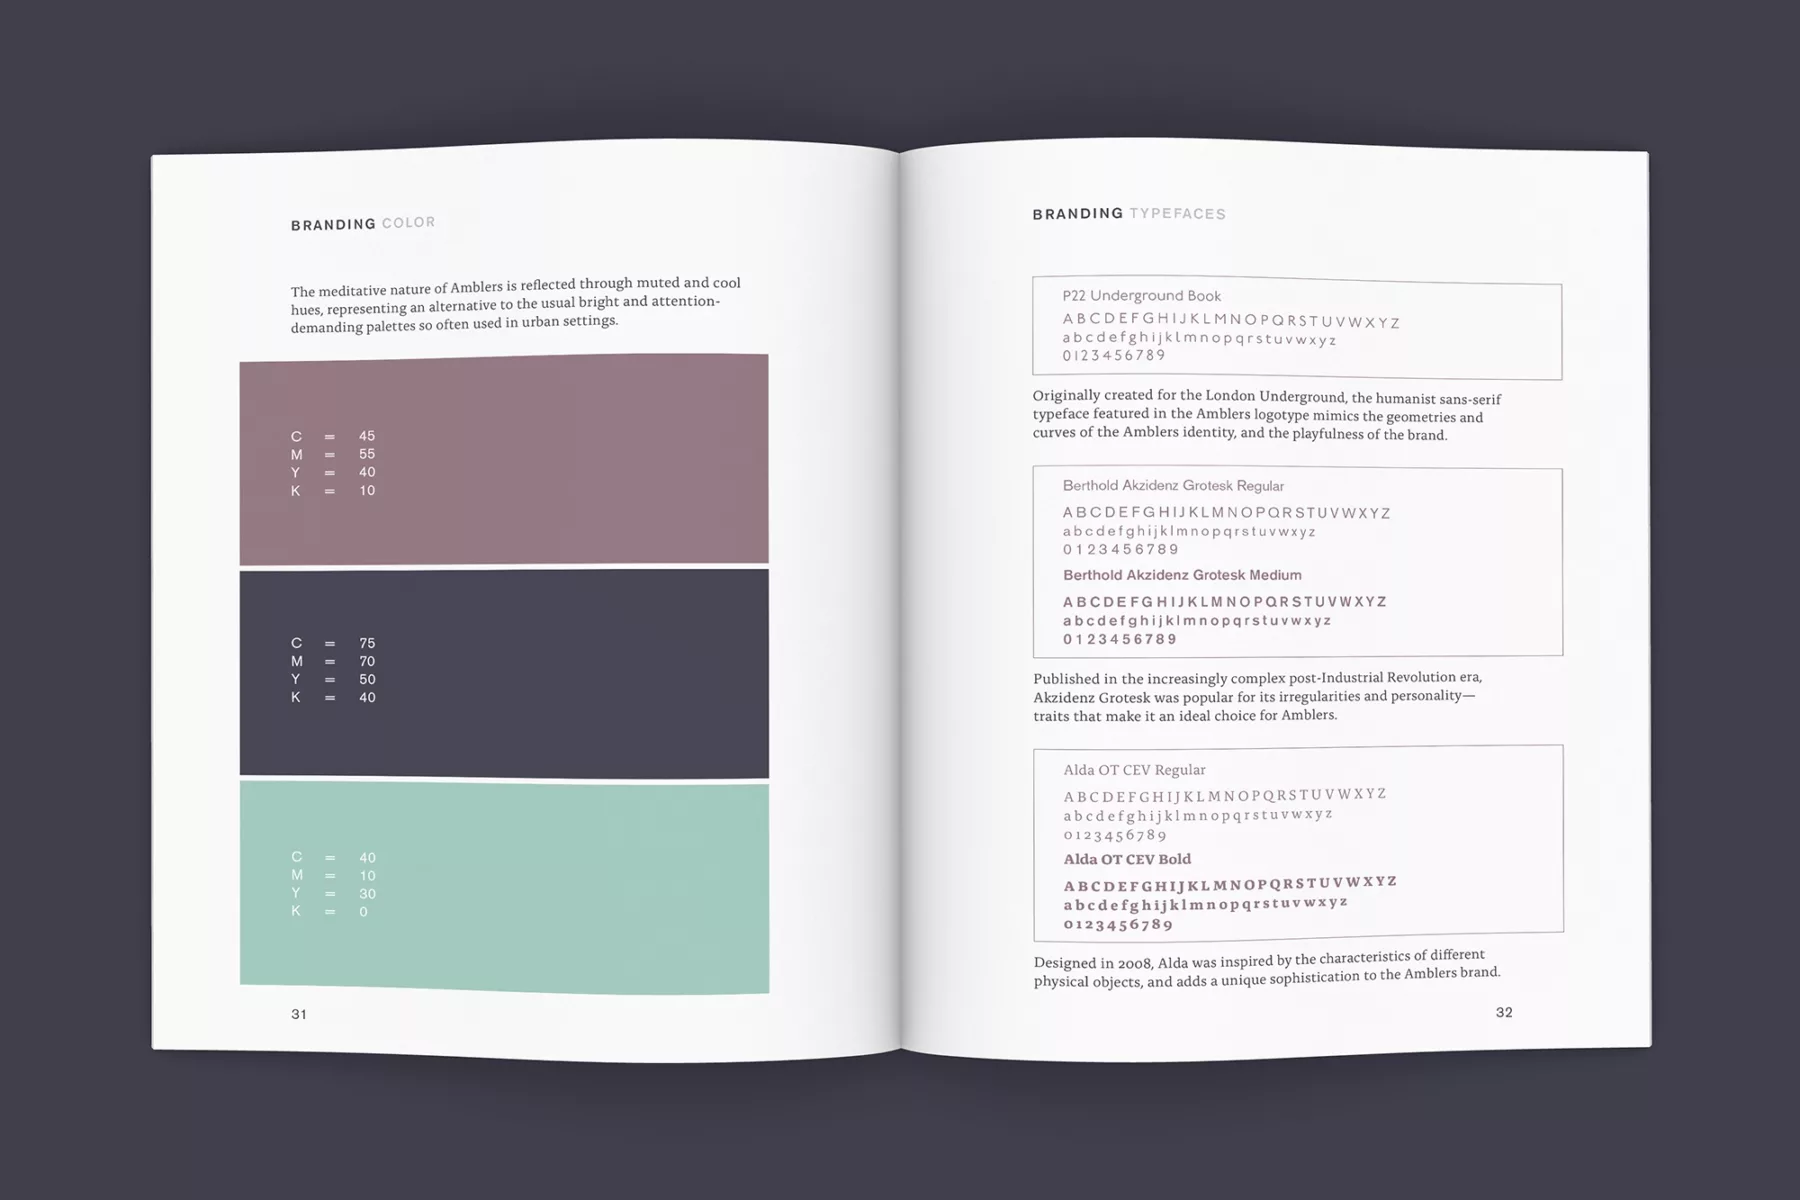 Book spread with Amblers branding guidelines (colors).